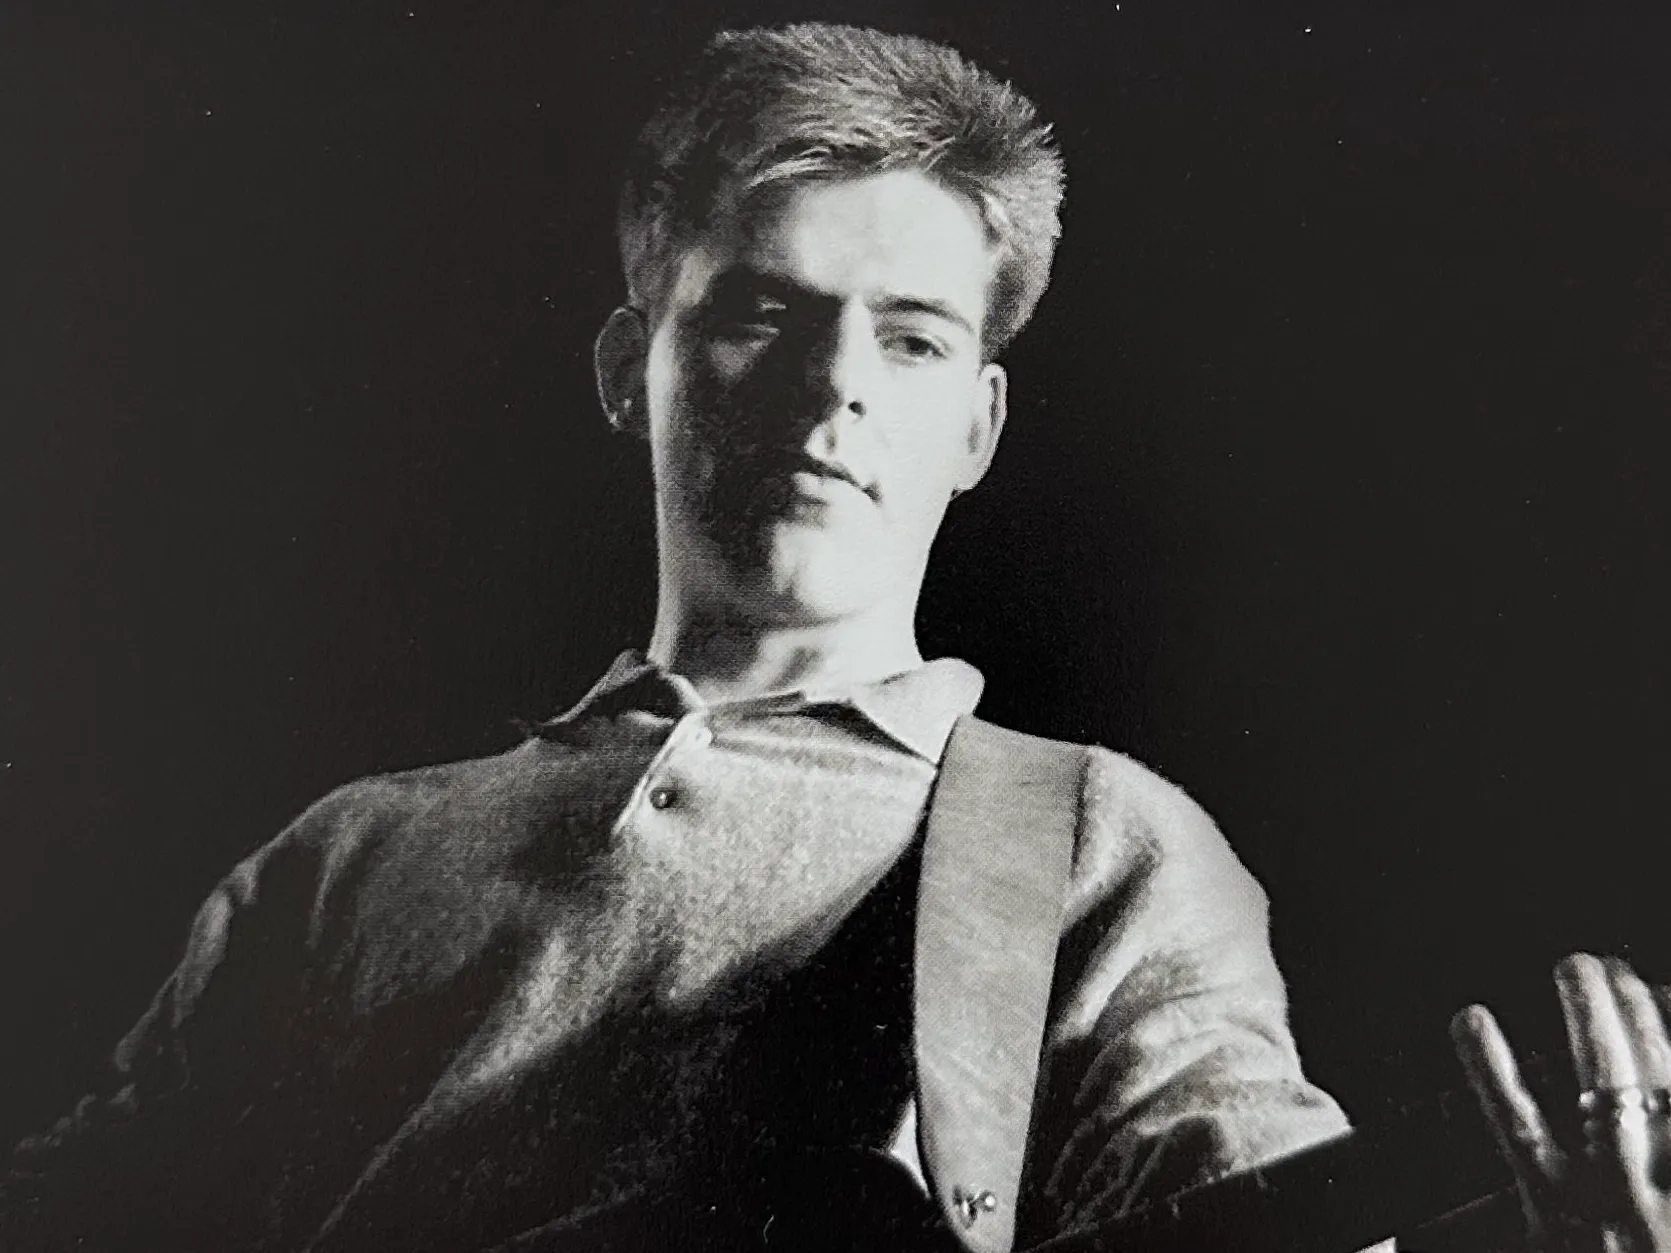 15 Unbelievable Facts About Andy Rourke - Facts.net